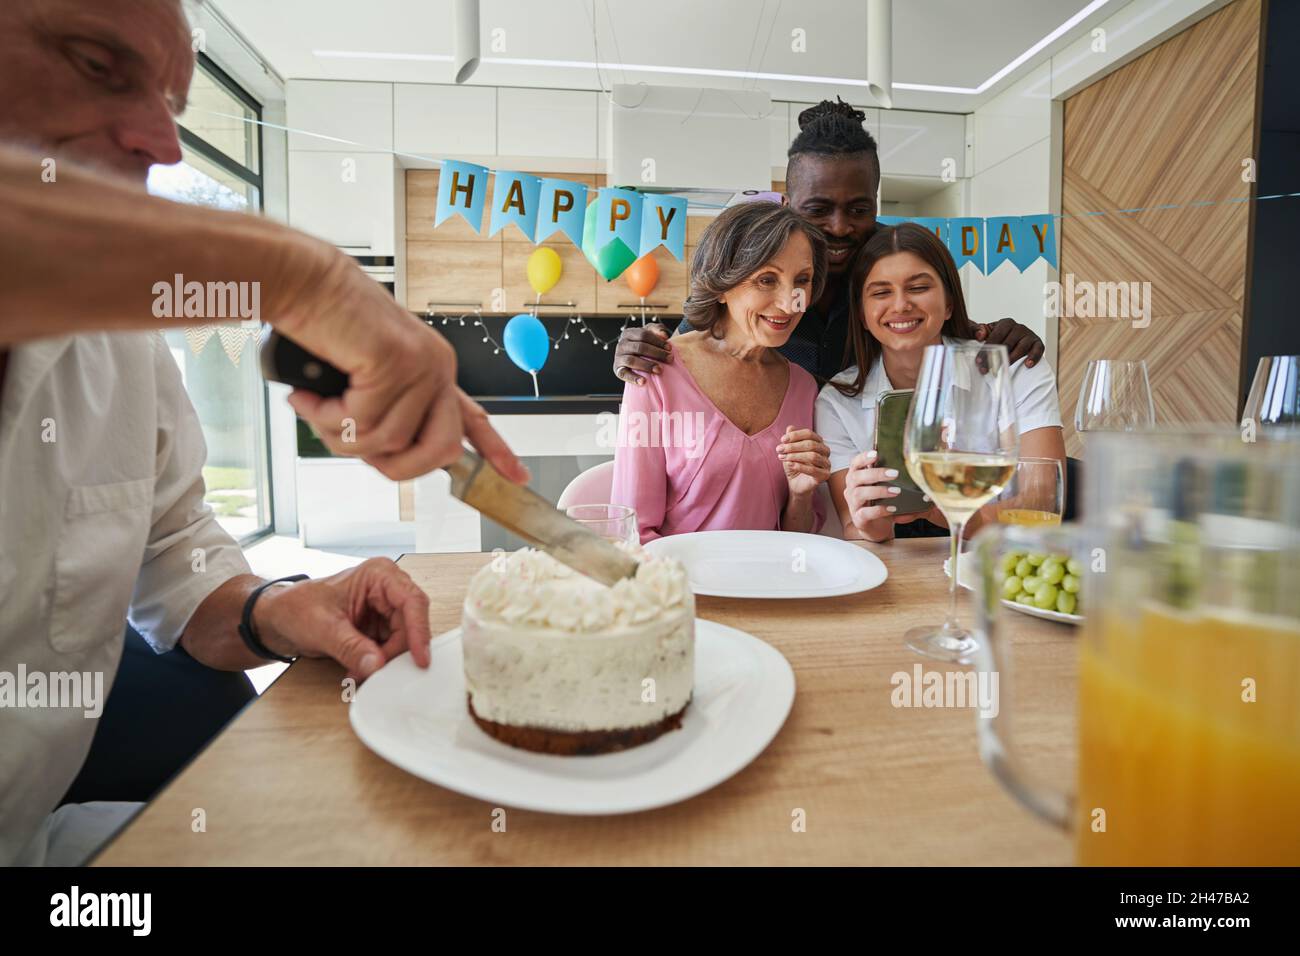 Man is cutting cake for birthday dinner Stock Photo